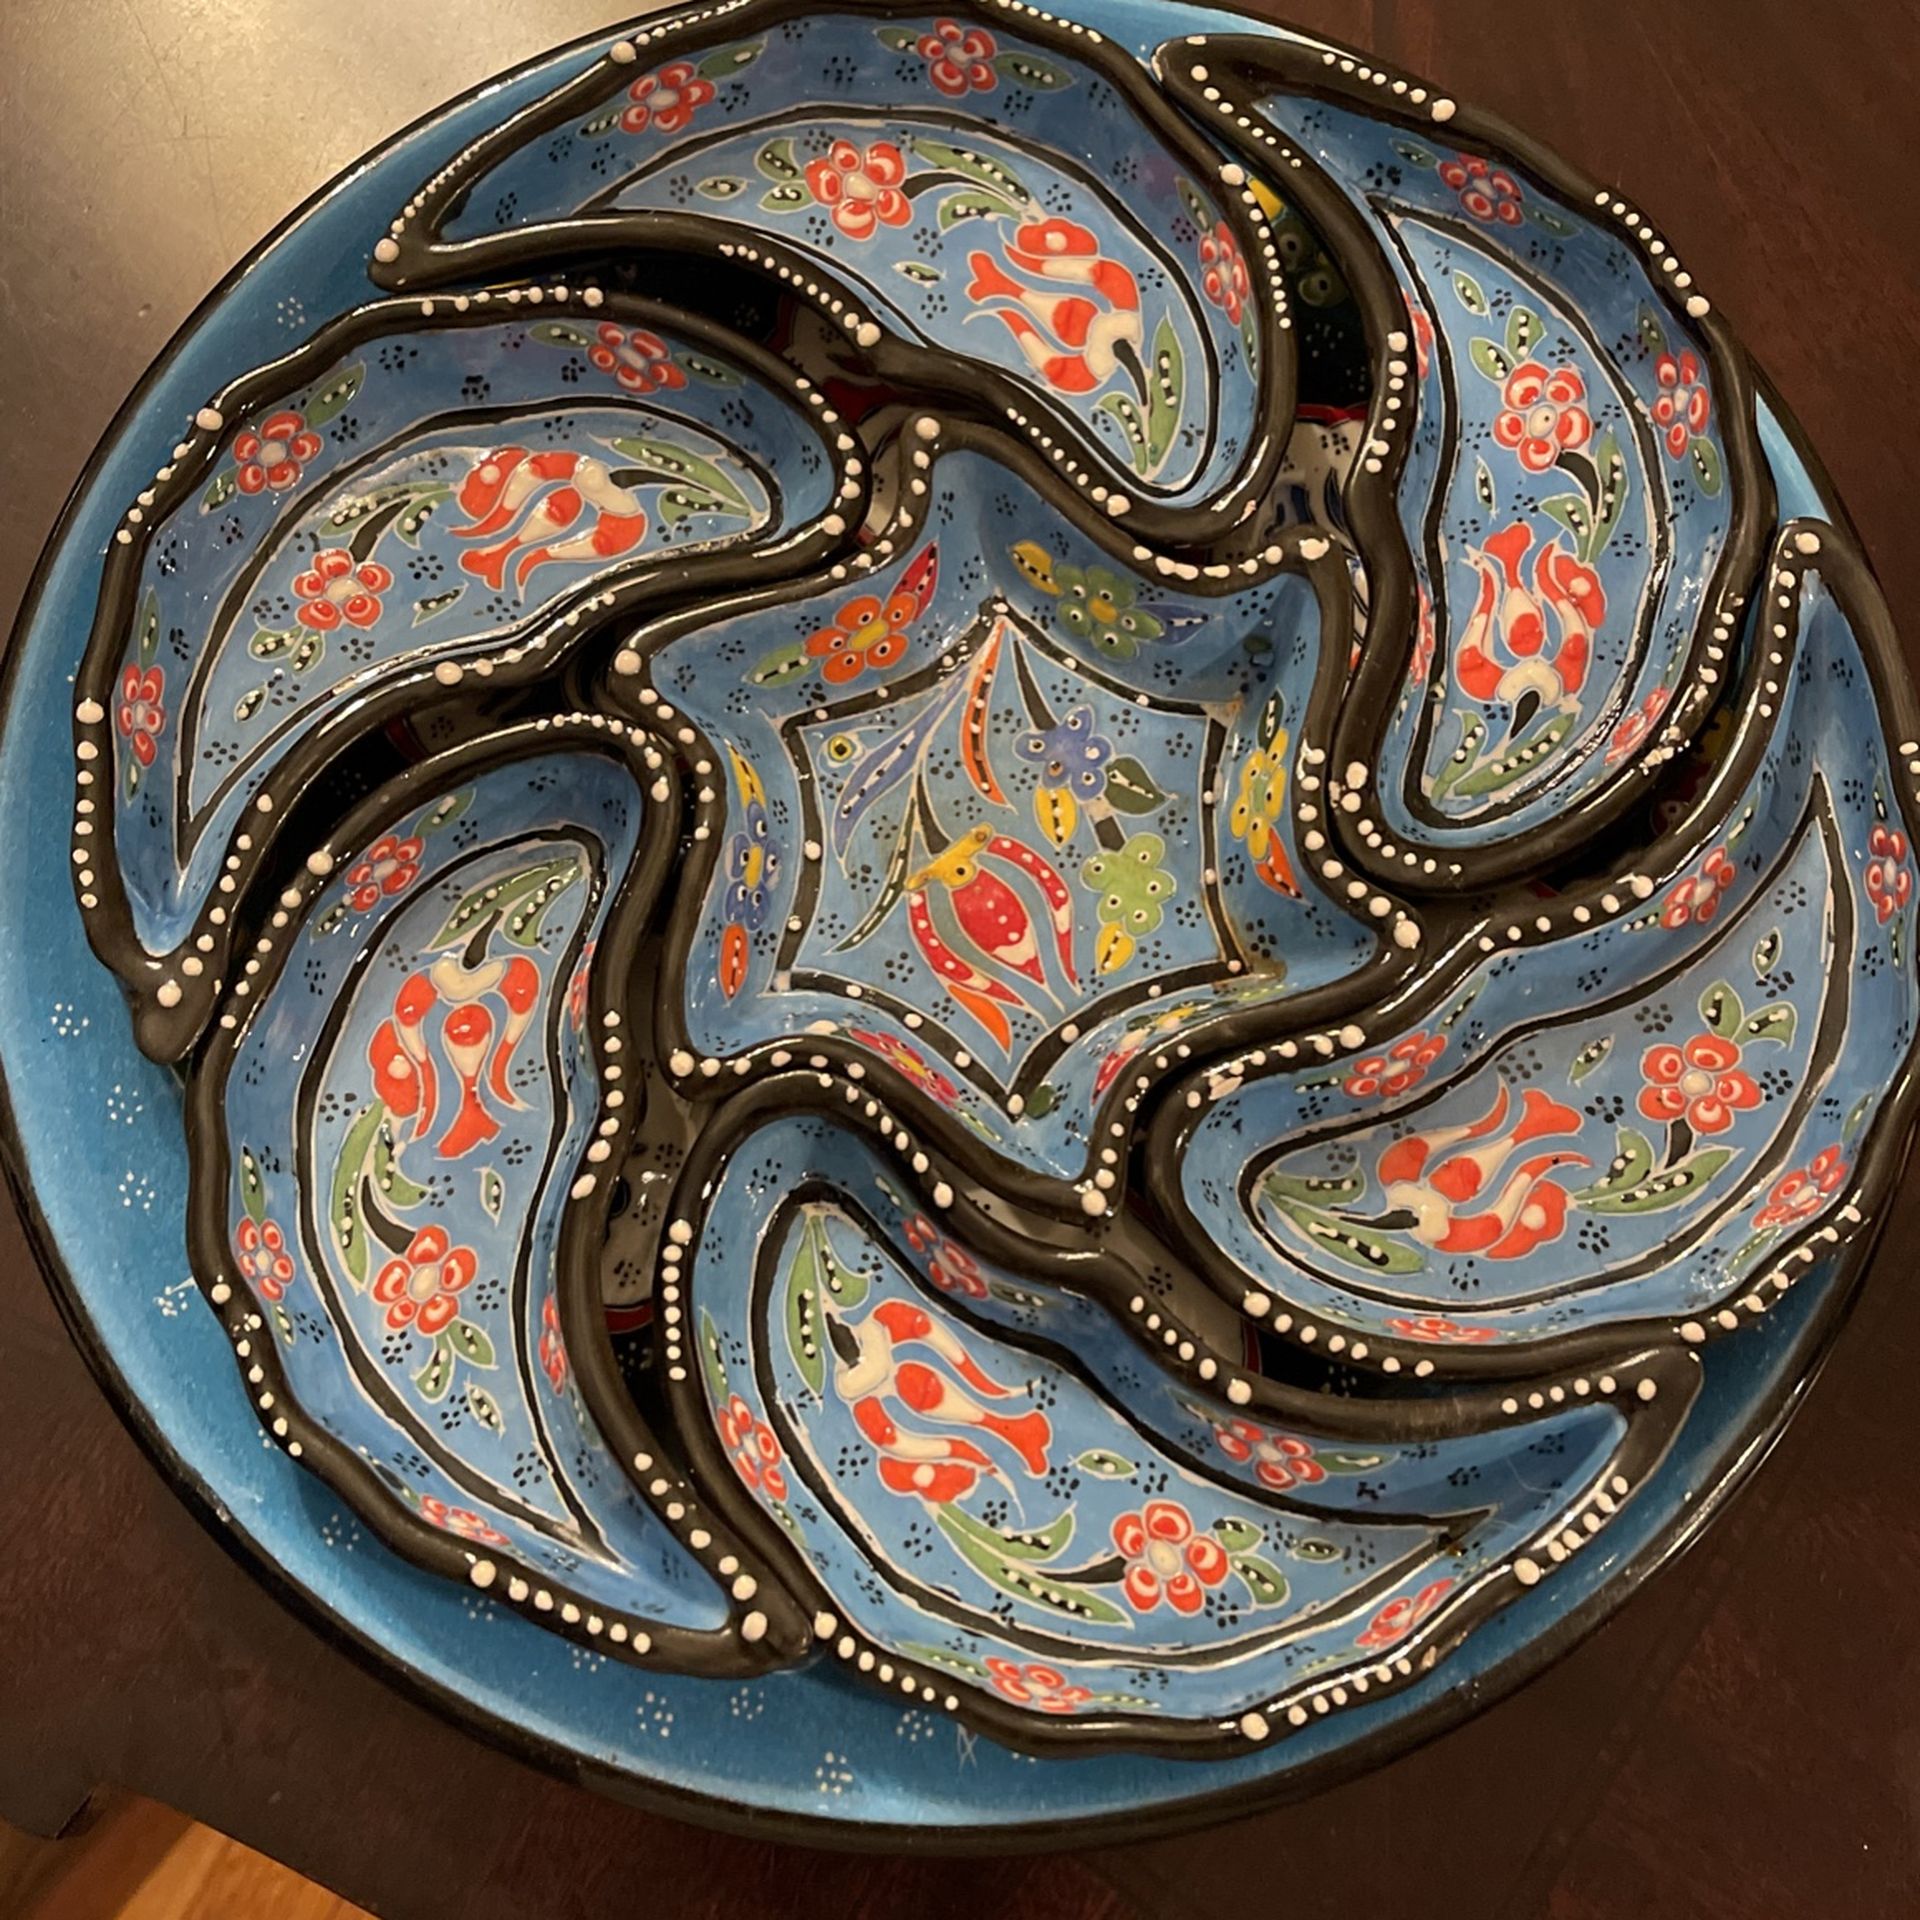 8 piece Ceramic serving tray from souk in Istanbul,Turkey